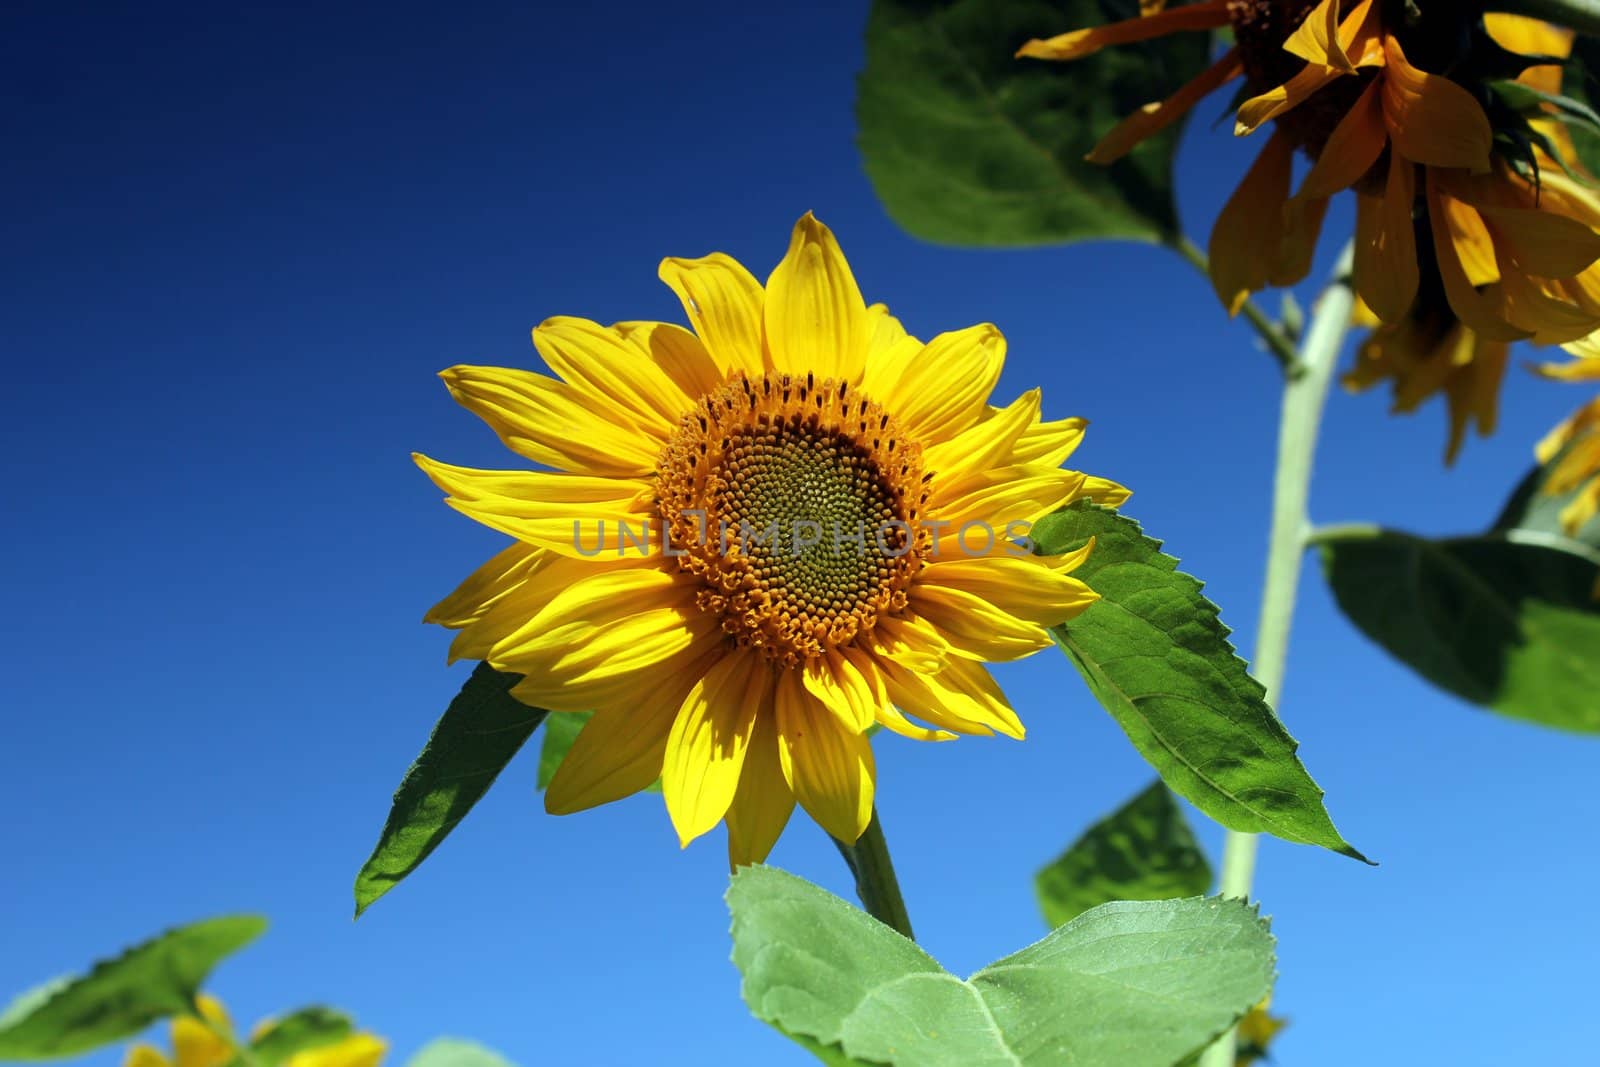 sunflower and blue summer sky by Teka77